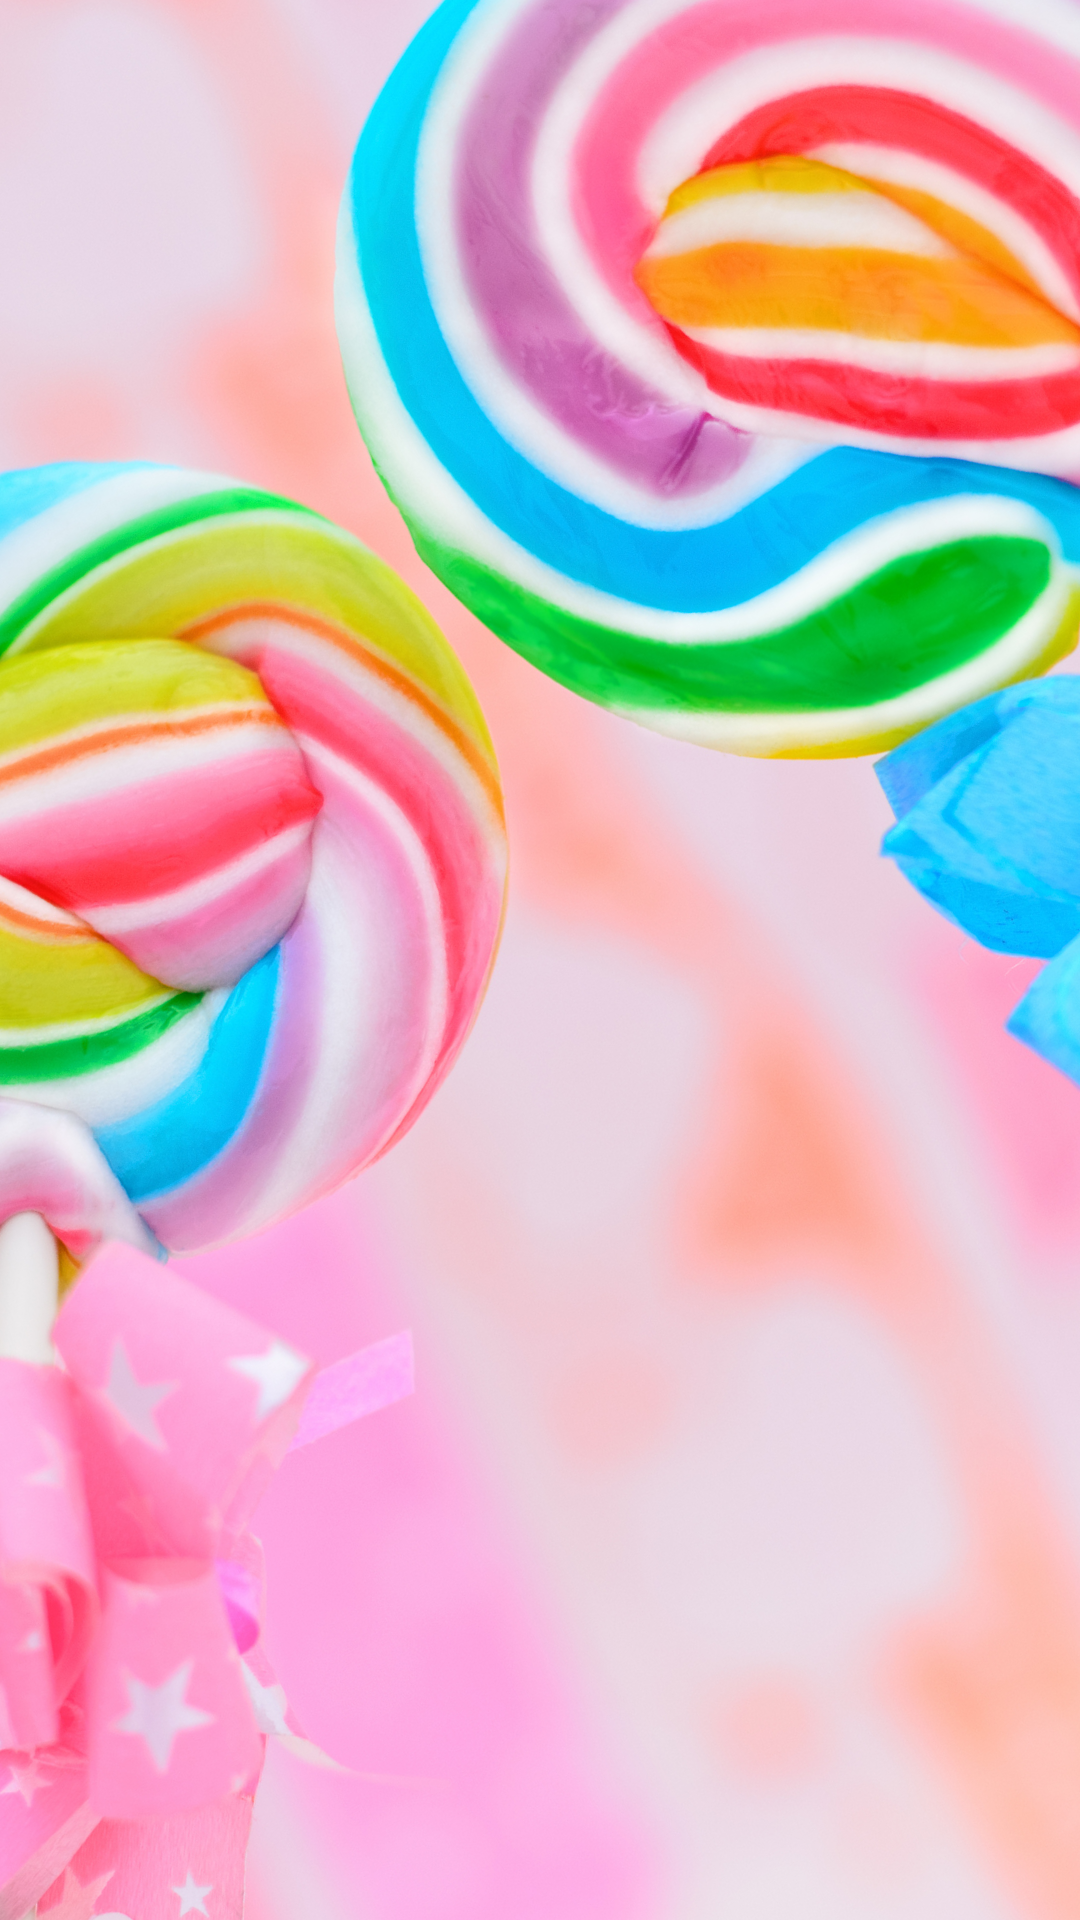 Aesthetic Candy Wallpapers